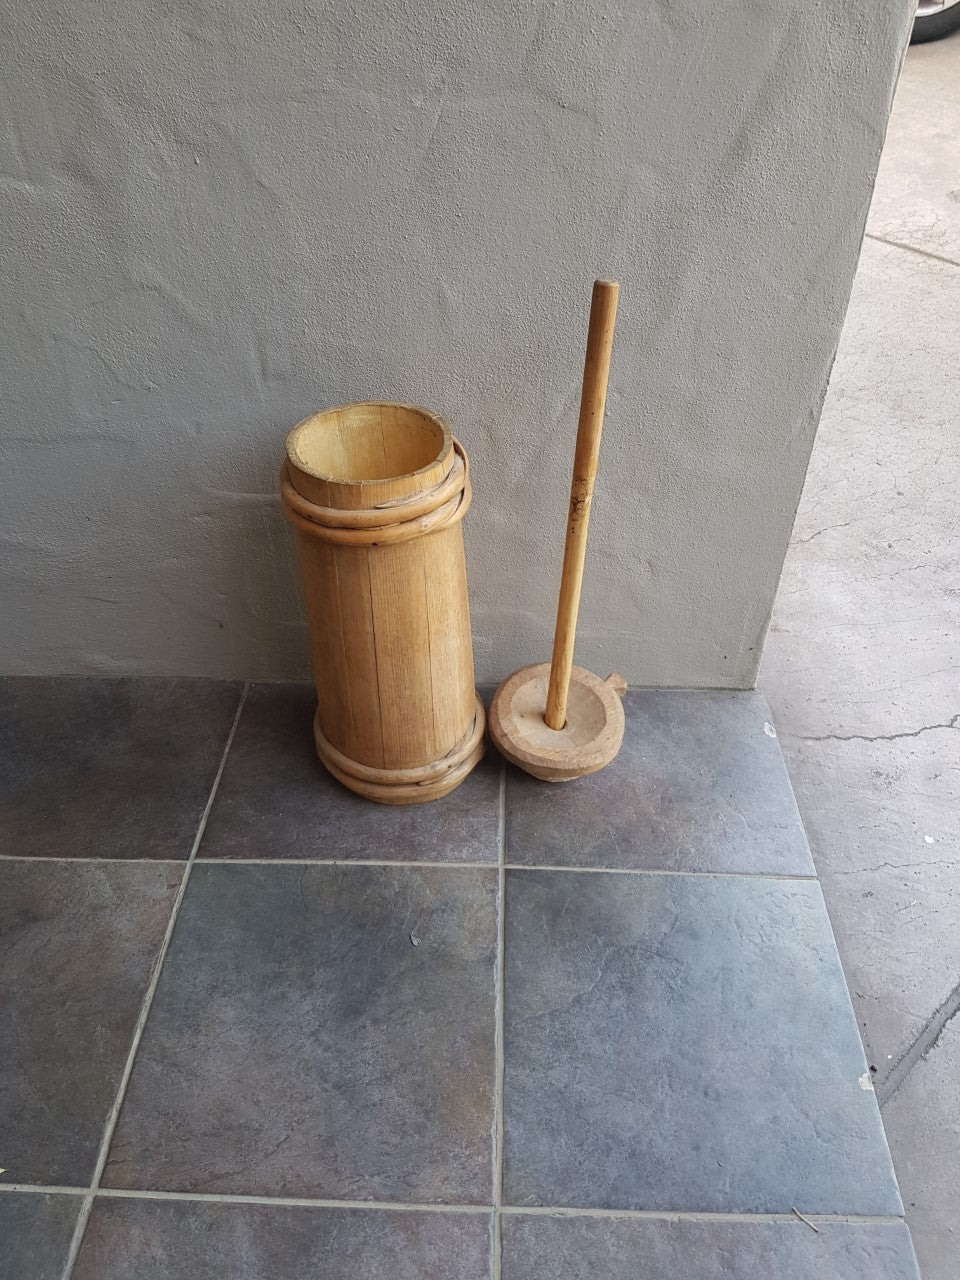 Wooden Churn with Plunger